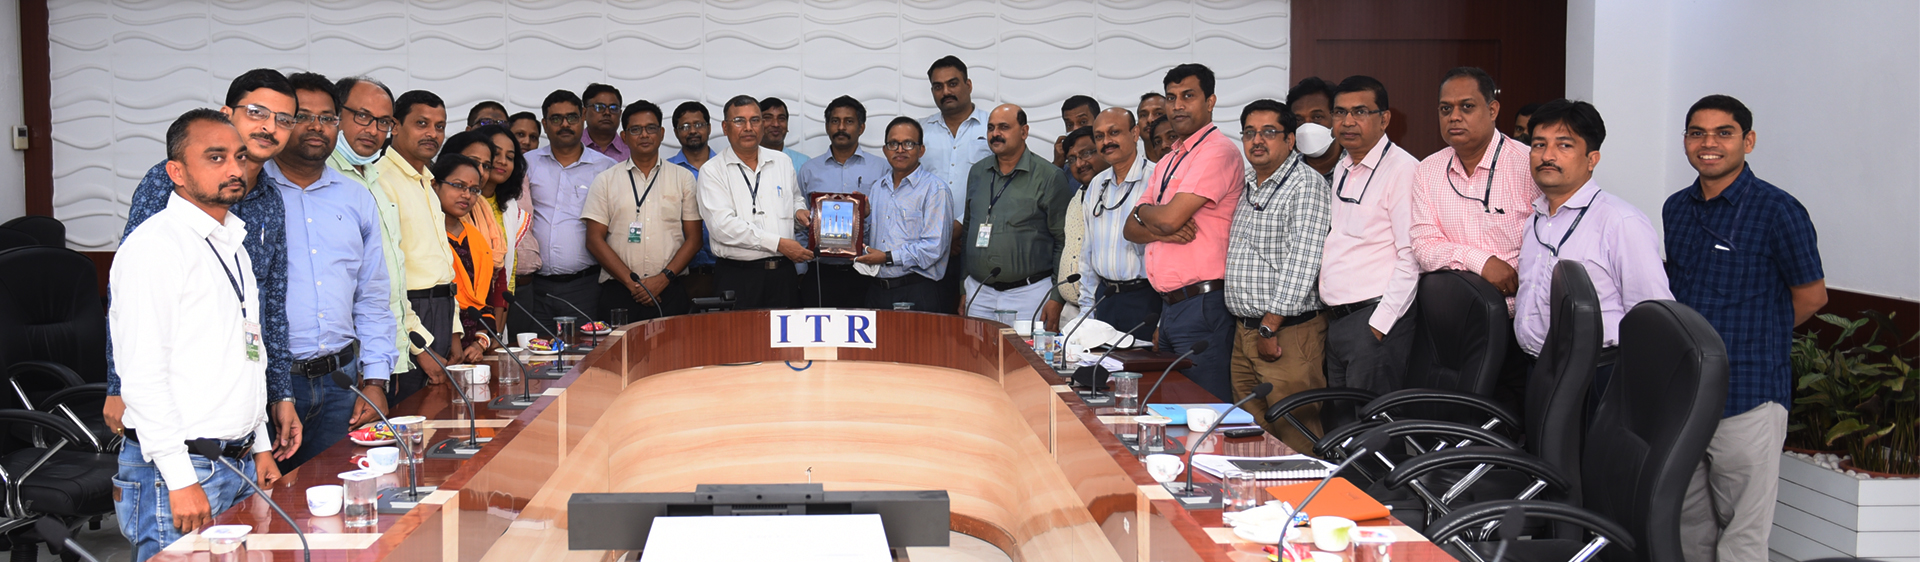 Visit of VC and faculty members to ITR - DRDO Chandipur for Research Collaboration during 4th-5th April 2022.